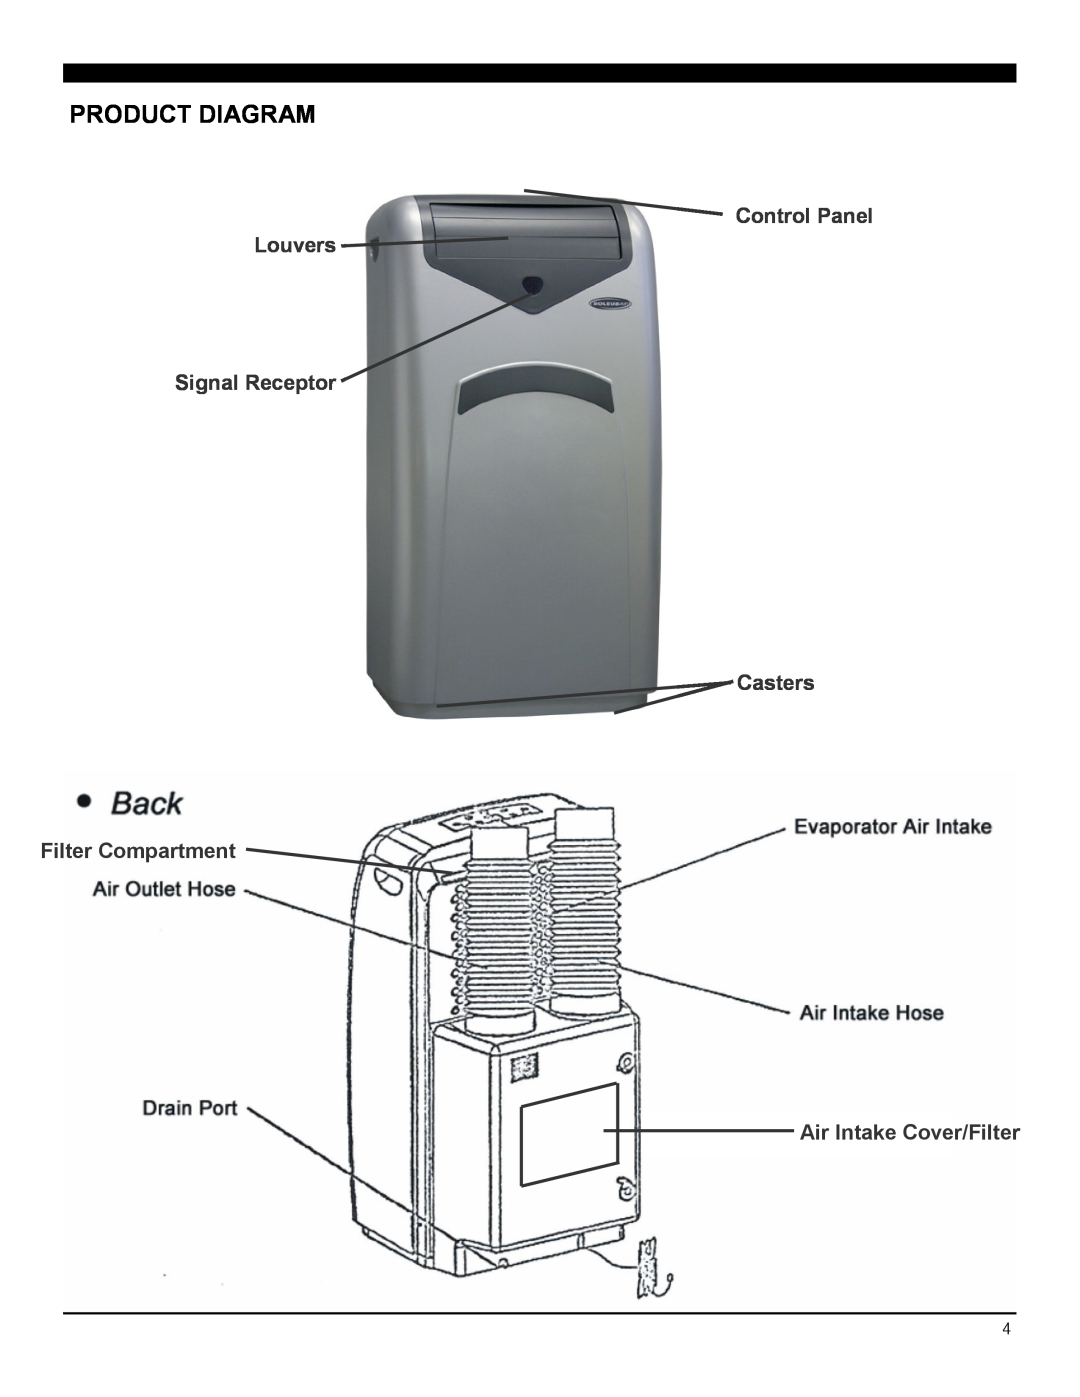 NewAir LX-100 Product Diagram, Control Panel Louvers Signal Receptor Casters, Filter Compartment Air Intake Cover/Filter 